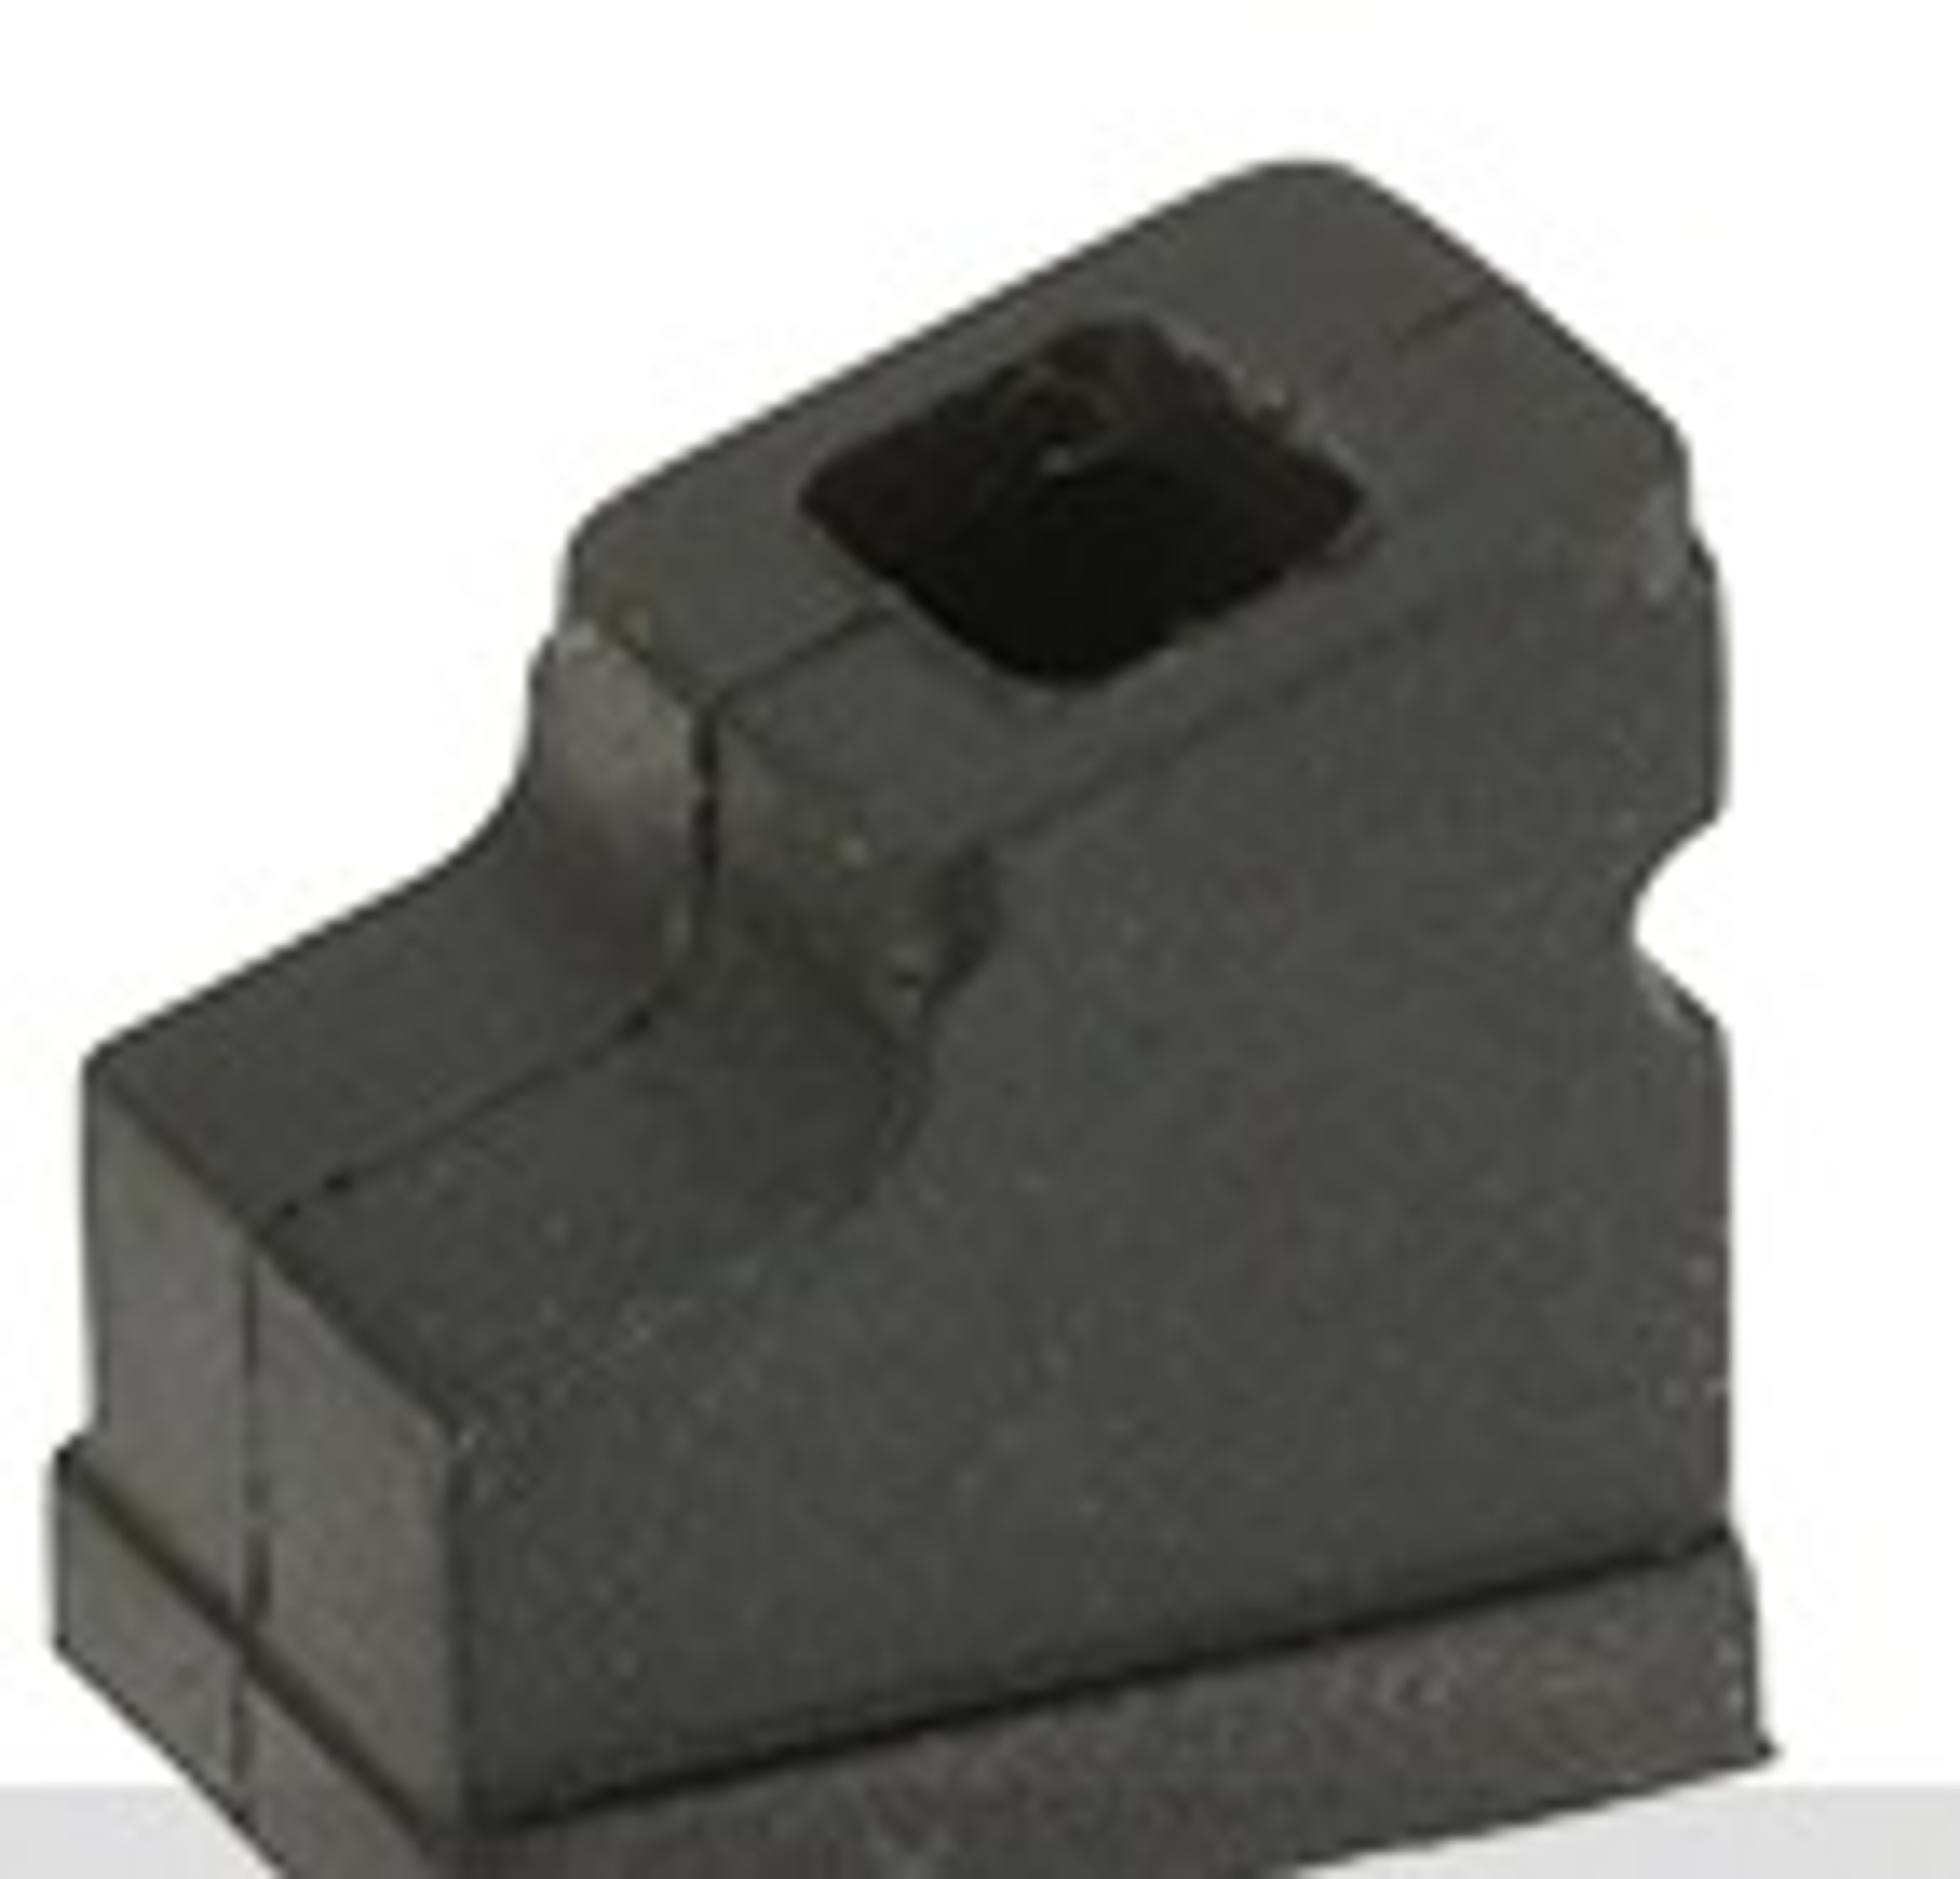 KJW Factory Replacement Magazine Gasket For P226 GBB Airsoft Pistols